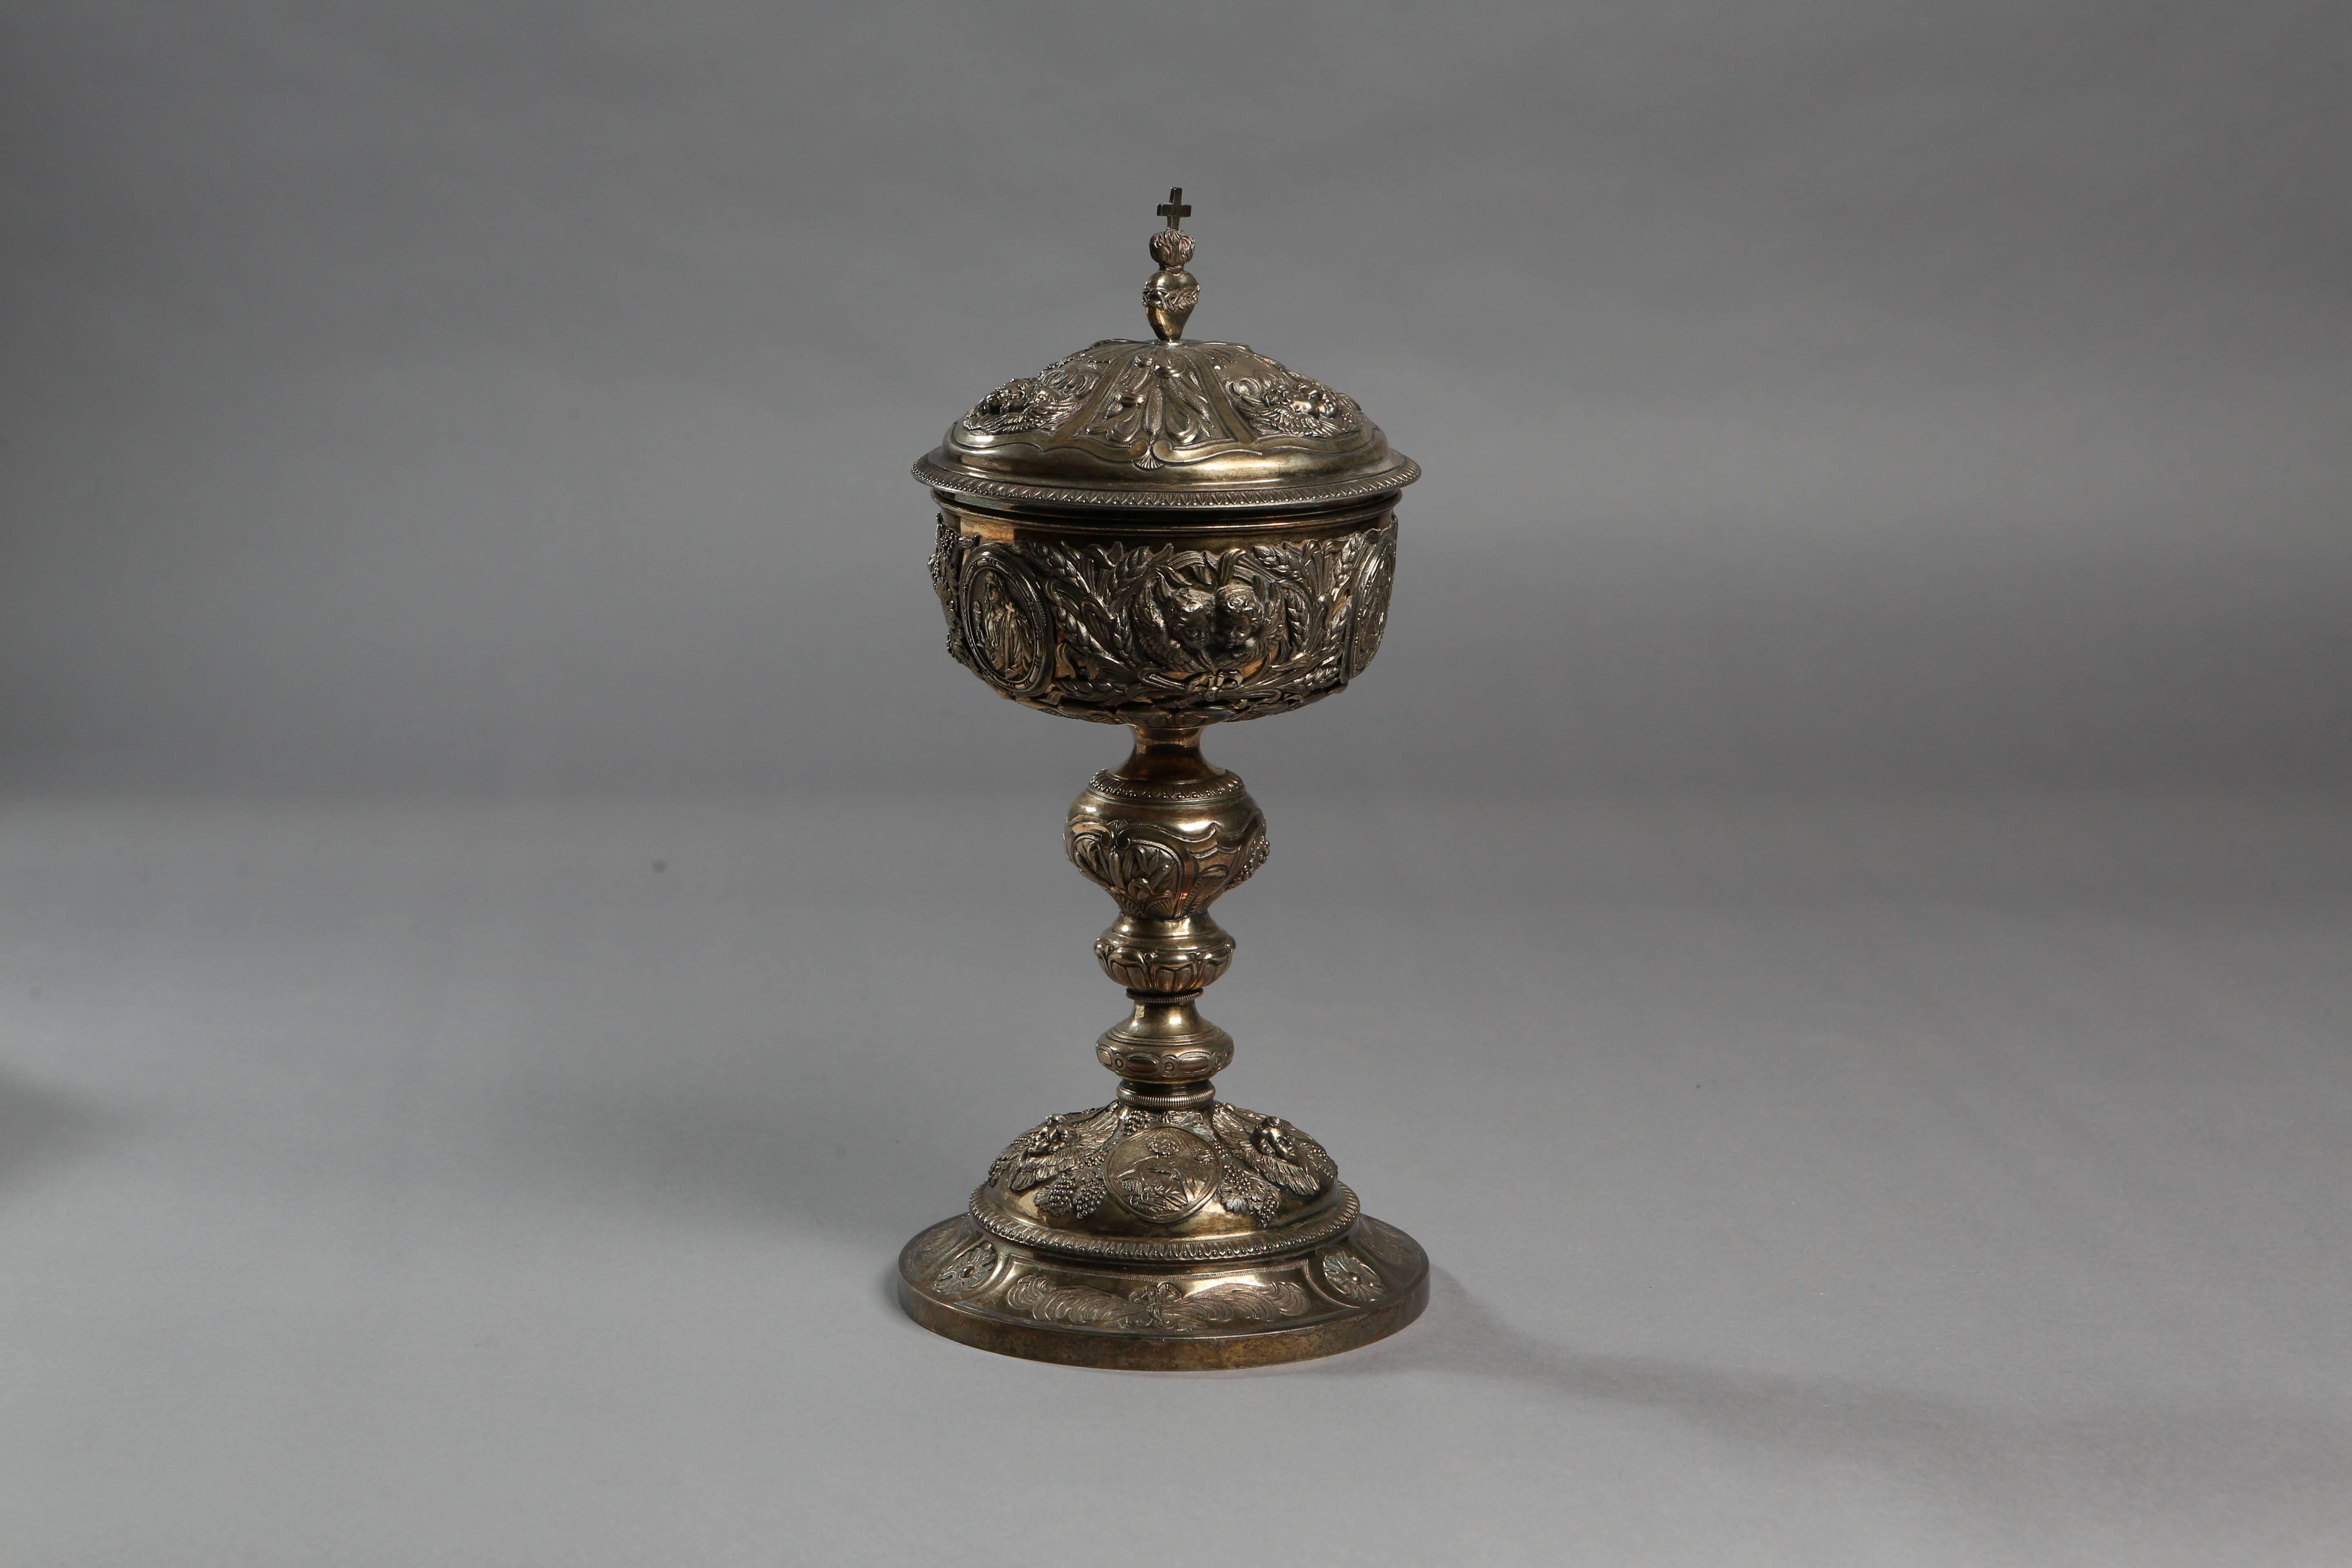 A silver gilt ciborium that is decorated with medallions of the saints on the base and the cup of the chalice. The bottom features depictions of Jesus wearing a crown of thorns and holding the pastoral staff, the ascending Virgin Mary, and Saint